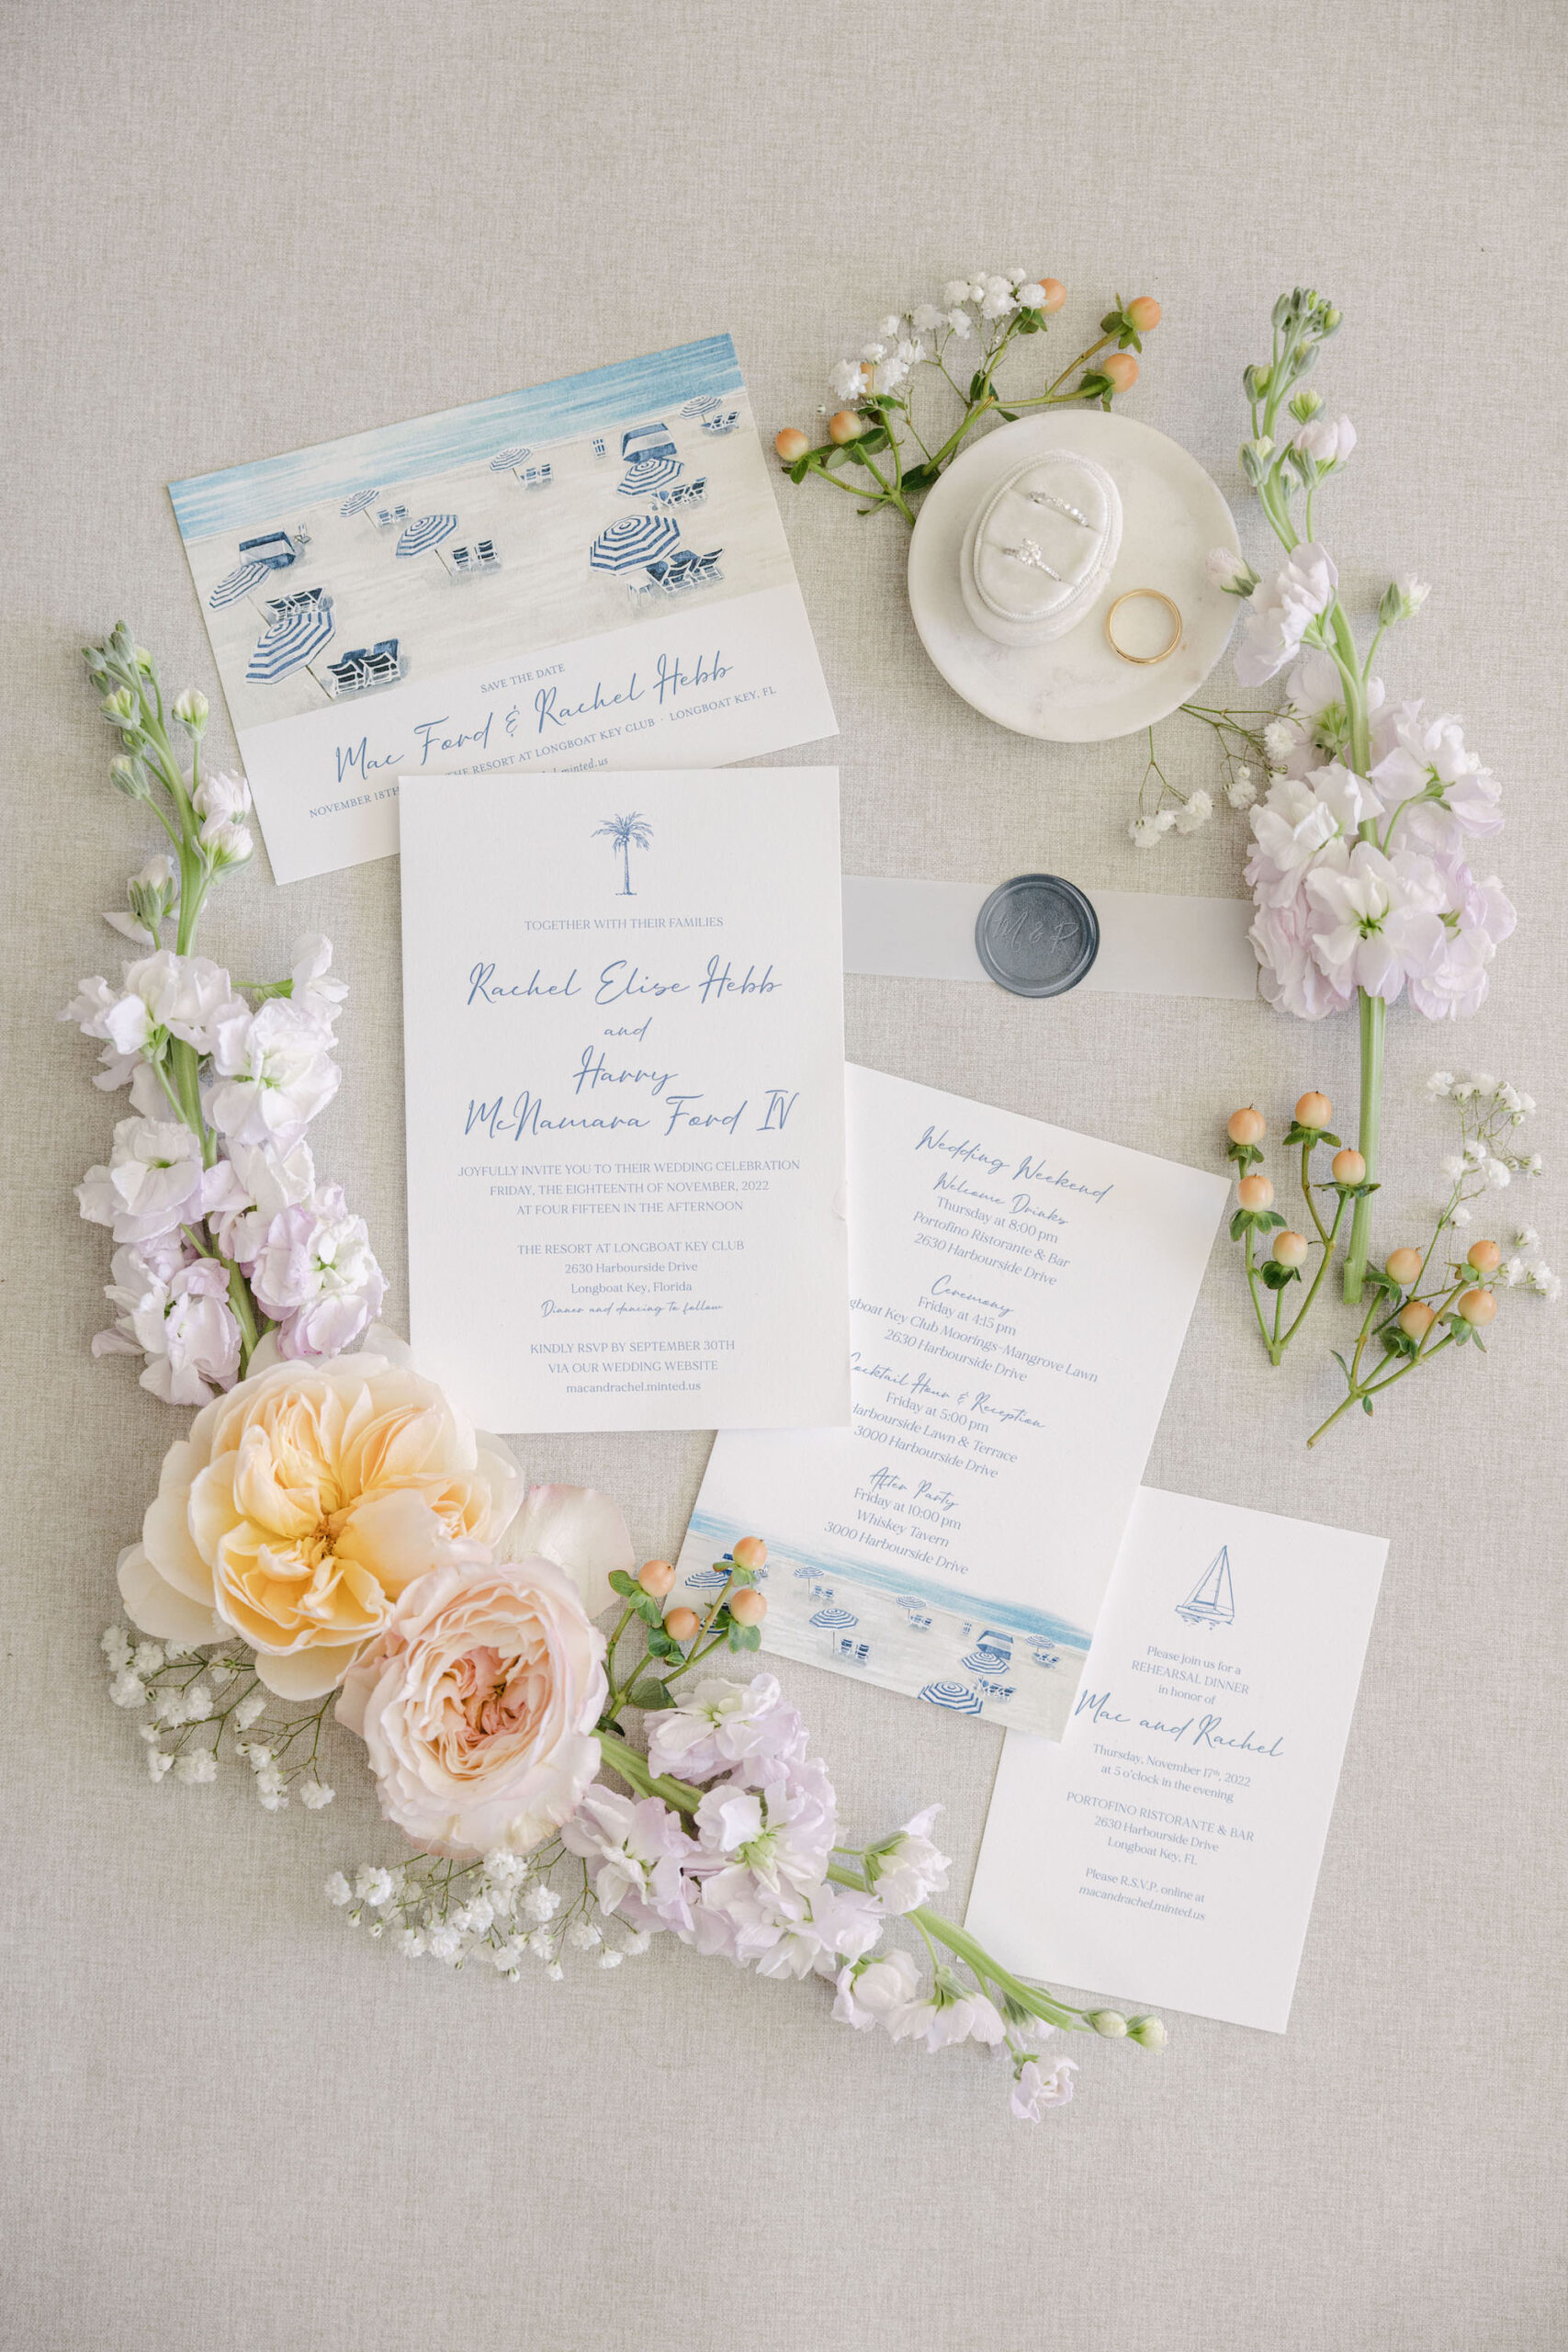 Tropical Beach Palm Tree Dusty Blue and White Wedding Invitation Suite Ideas